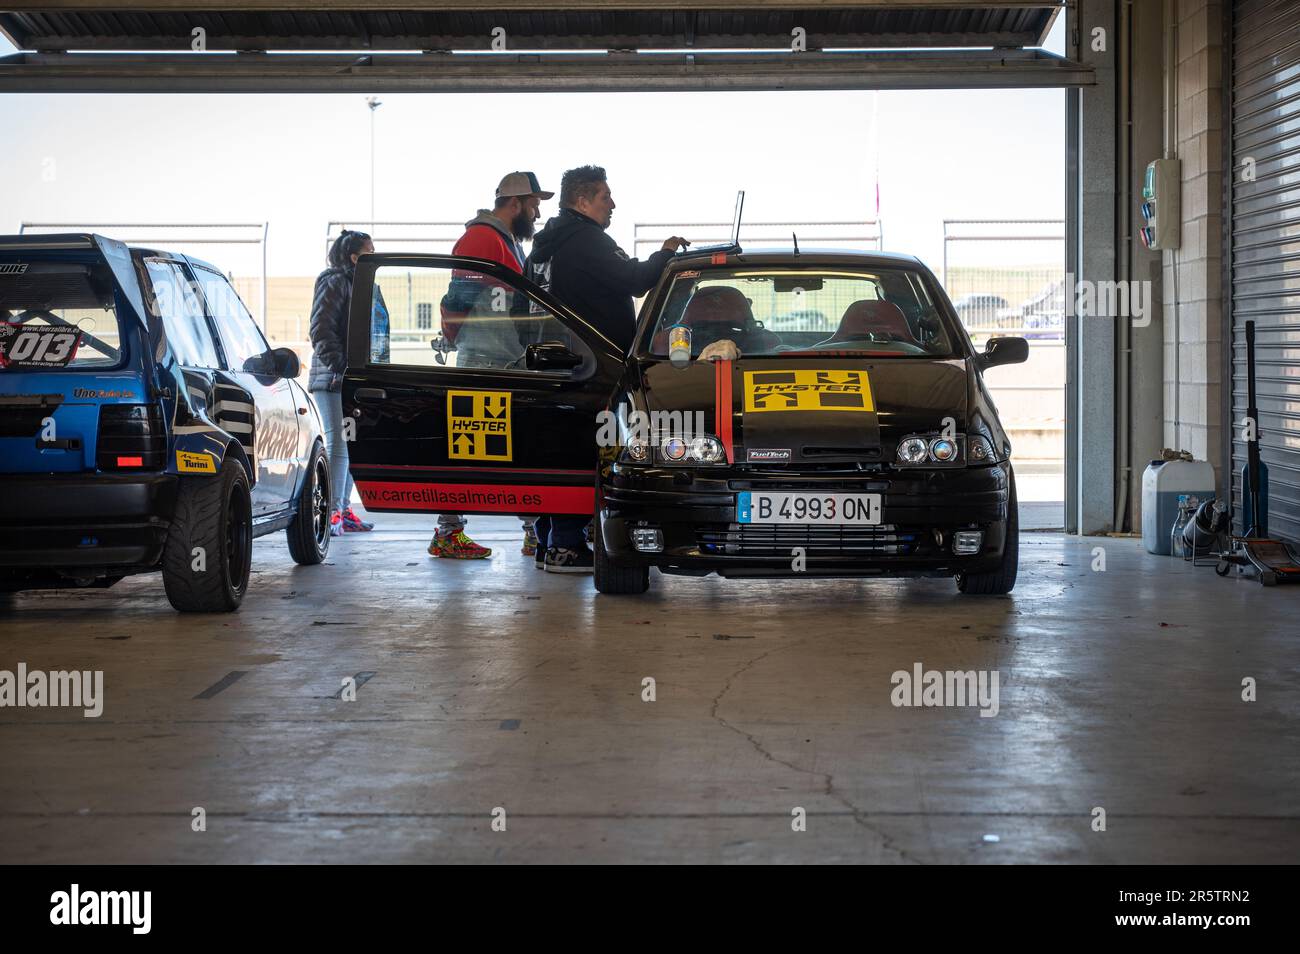 The Fiat Uno drag racing car in the garage Stock Photo